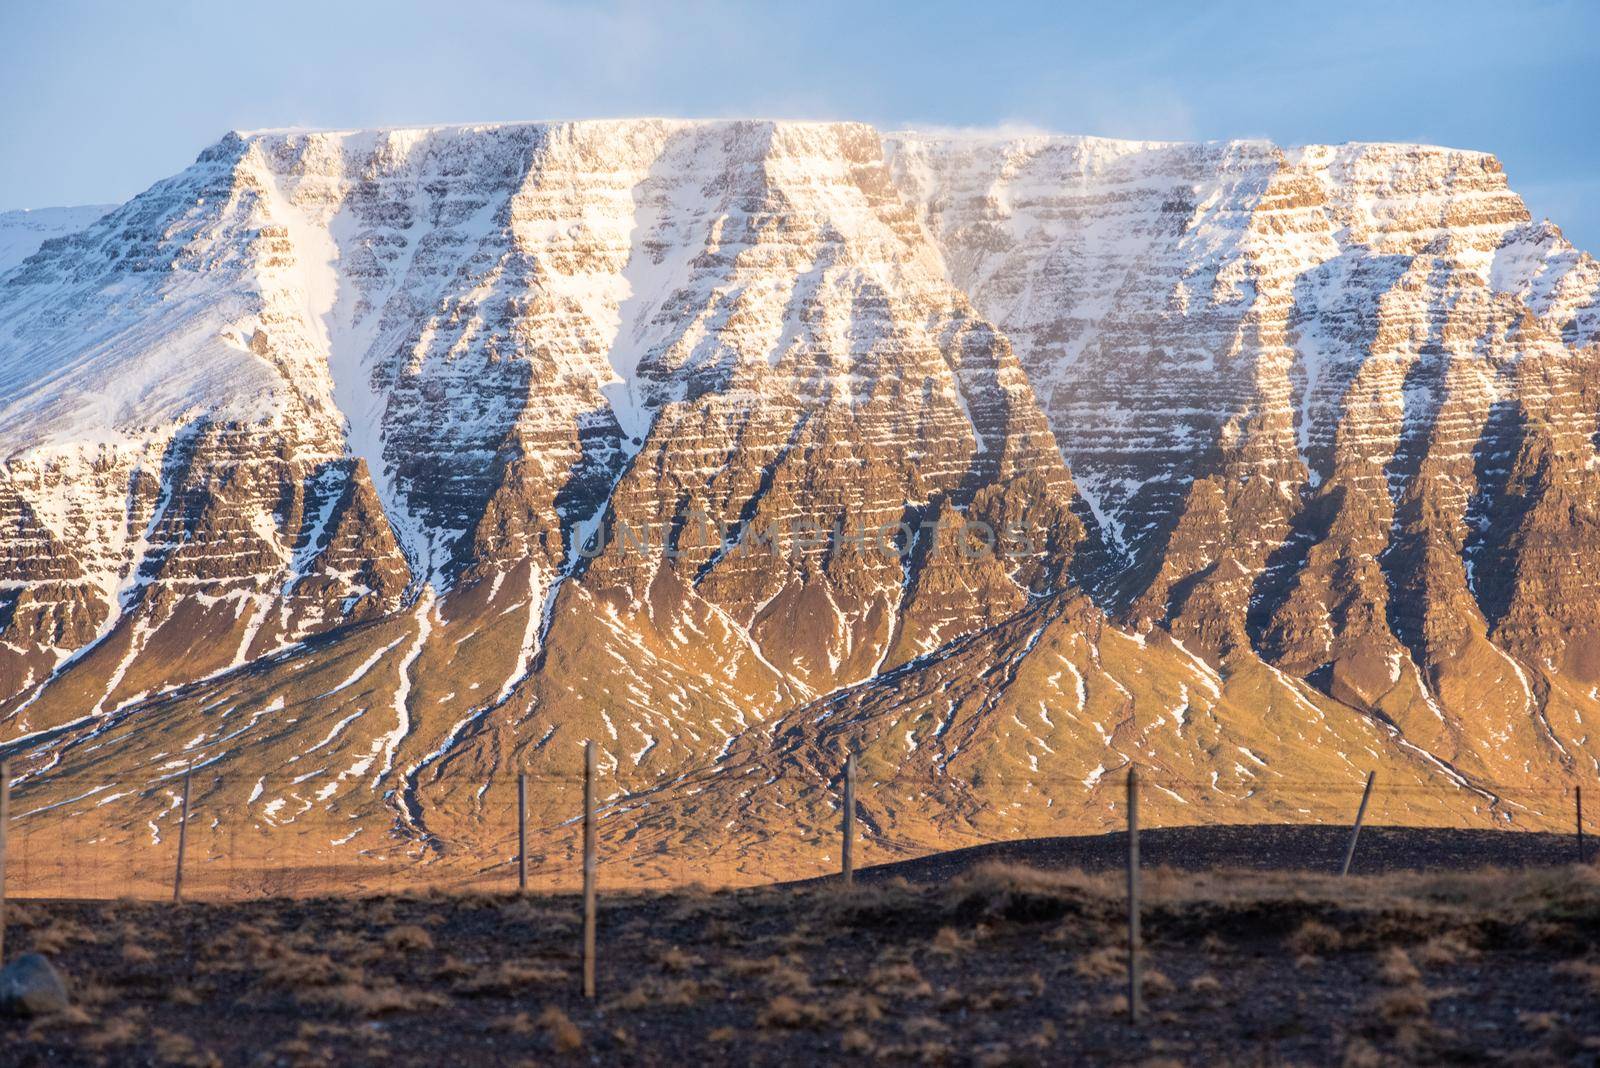 Golden hour lighting close up of geological phenomenon in Iceland snow capped mountain wind blowing freezing texture layers landscape cliff edges wow